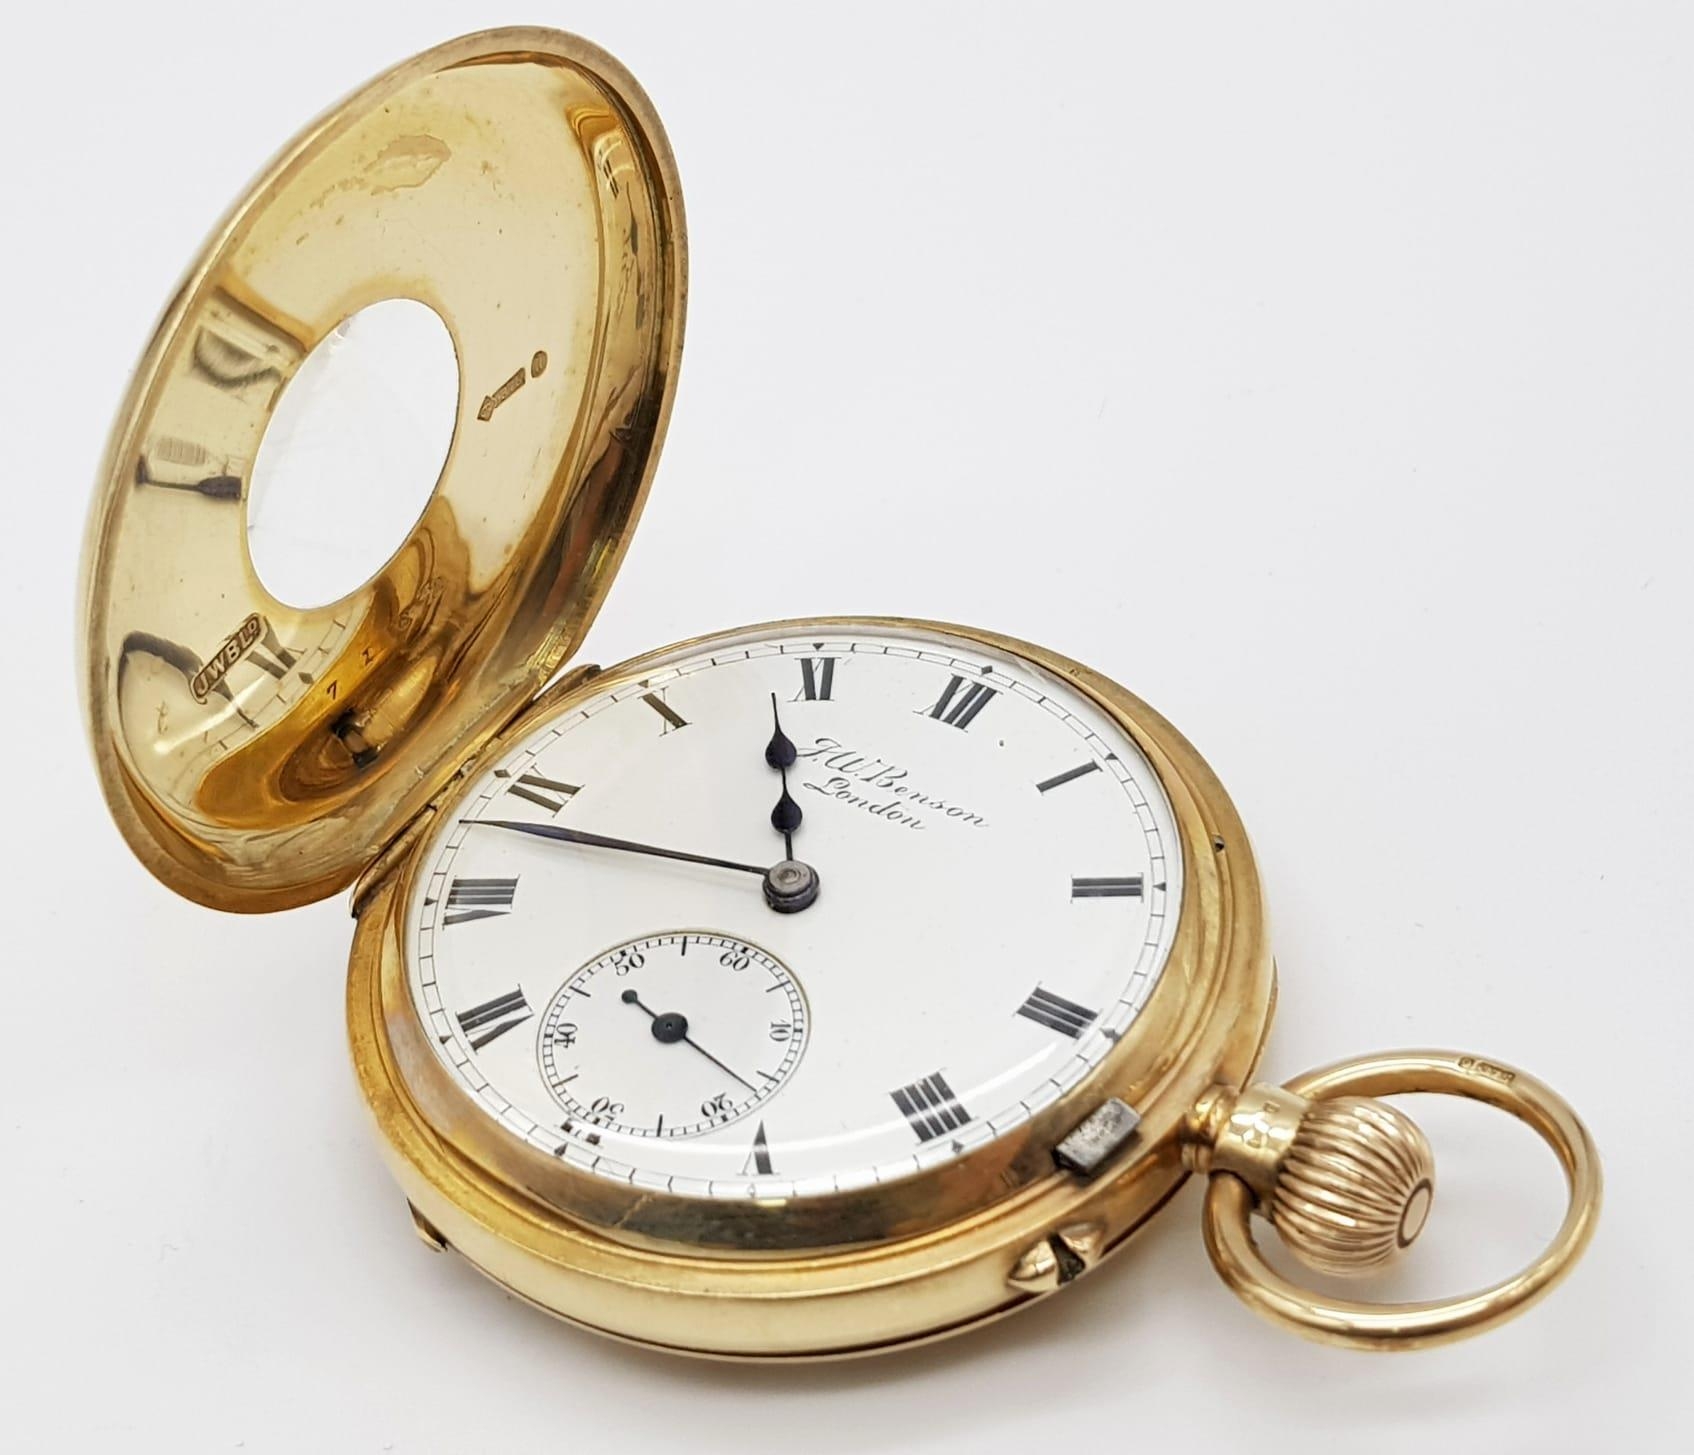 A Wonderfully Crafted 9K Gold J.W. Benson Half-Hunter Pocket Watch. White dial with sub second dial. - Image 2 of 9